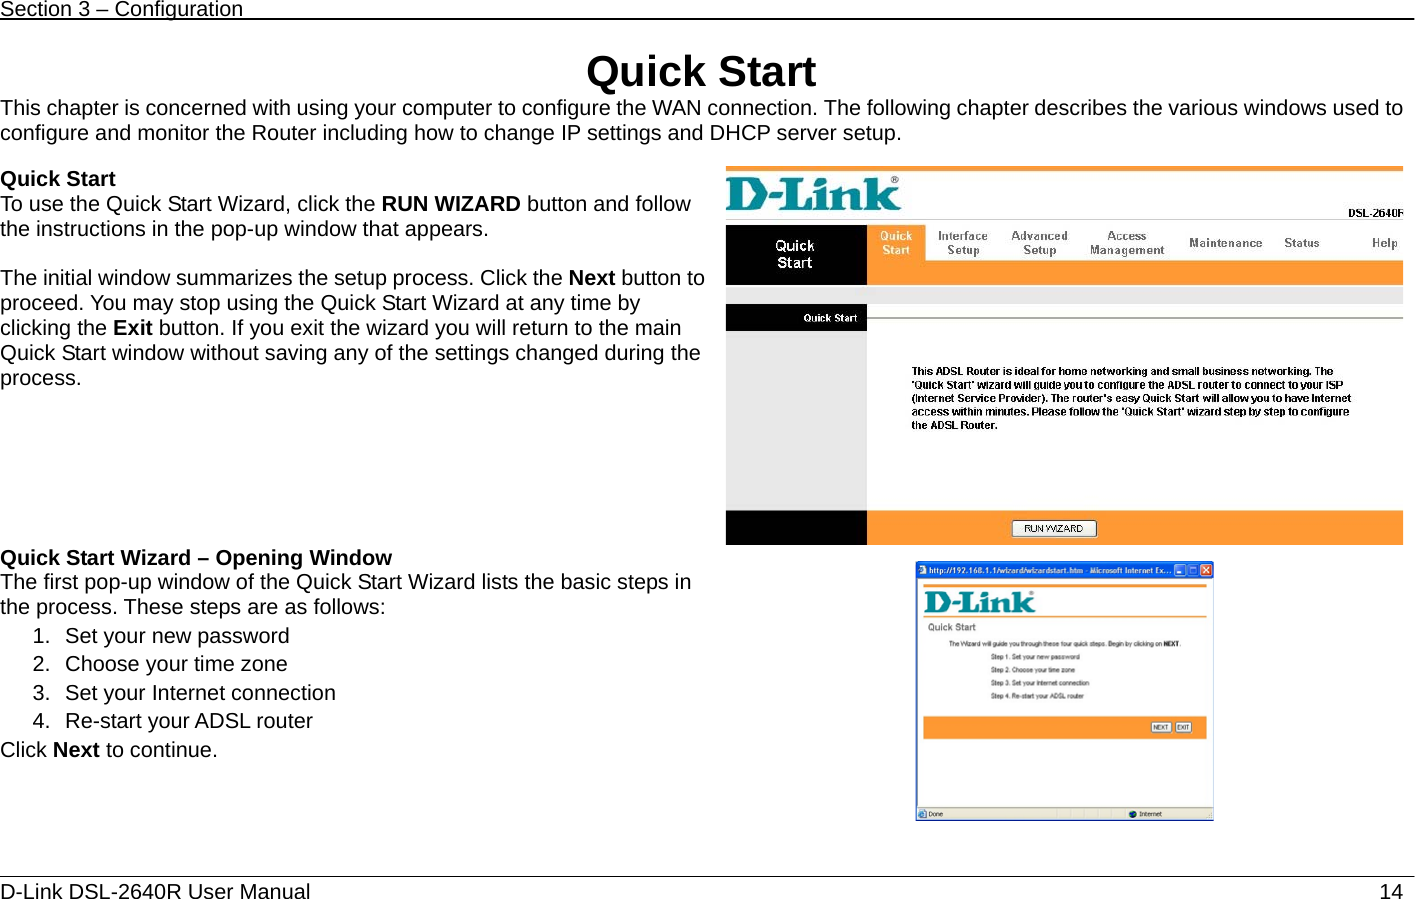 Section 3 – Configuration   D-Link DSL-2640R User Manual                           14Quick Start This chapter is concerned with using your computer to configure the WAN connection. The following chapter describes the various windows used to configure and monitor the Router including how to change IP settings and DHCP server setup.  Quick Start To use the Quick Start Wizard, click the RUN WIZARD button and follow the instructions in the pop-up window that appears.  The initial window summarizes the setup process. Click the Next button to proceed. You may stop using the Quick Start Wizard at any time by clicking the Exit button. If you exit the wizard you will return to the main Quick Start window without saving any of the settings changed during the process. Quick Start Wizard – Opening Window The first pop-up window of the Quick Start Wizard lists the basic steps in the process. These steps are as follows:   1.  Set your new password 2.  Choose your time zone 3.  Set your Internet connection   4.  Re-start your ADSL router Click Next to continue.          